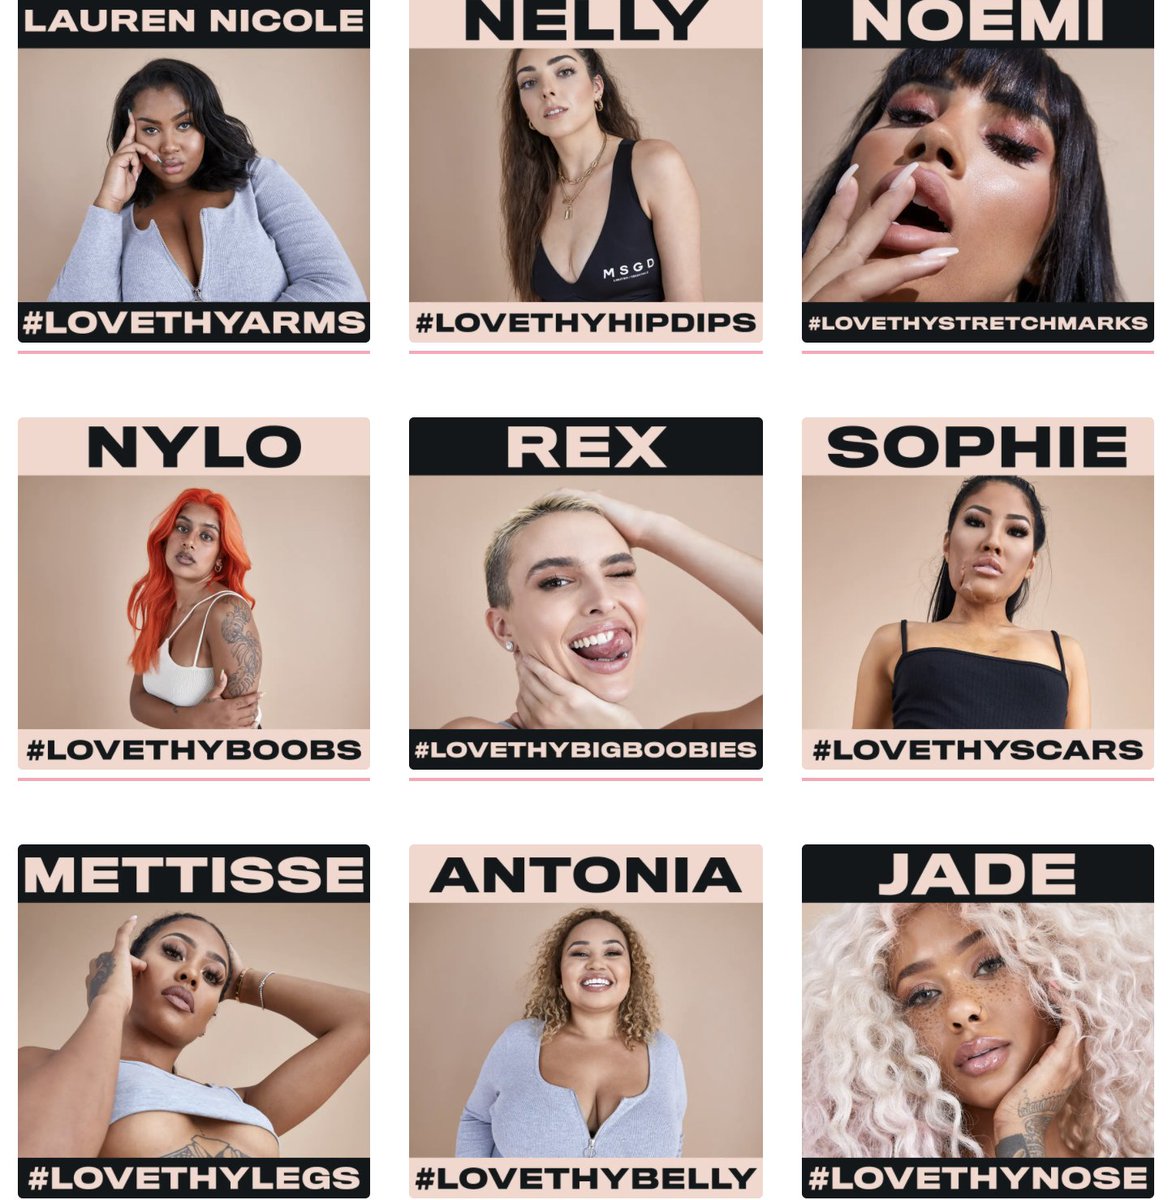 This campaign collaborated with infleuncers from all over highlighting their own personal body insecurities and how they've learnt to love thy self.6 pieces of content sat on the blog, with promotions showing which lingerie they were all wearing with banners on the main MG site